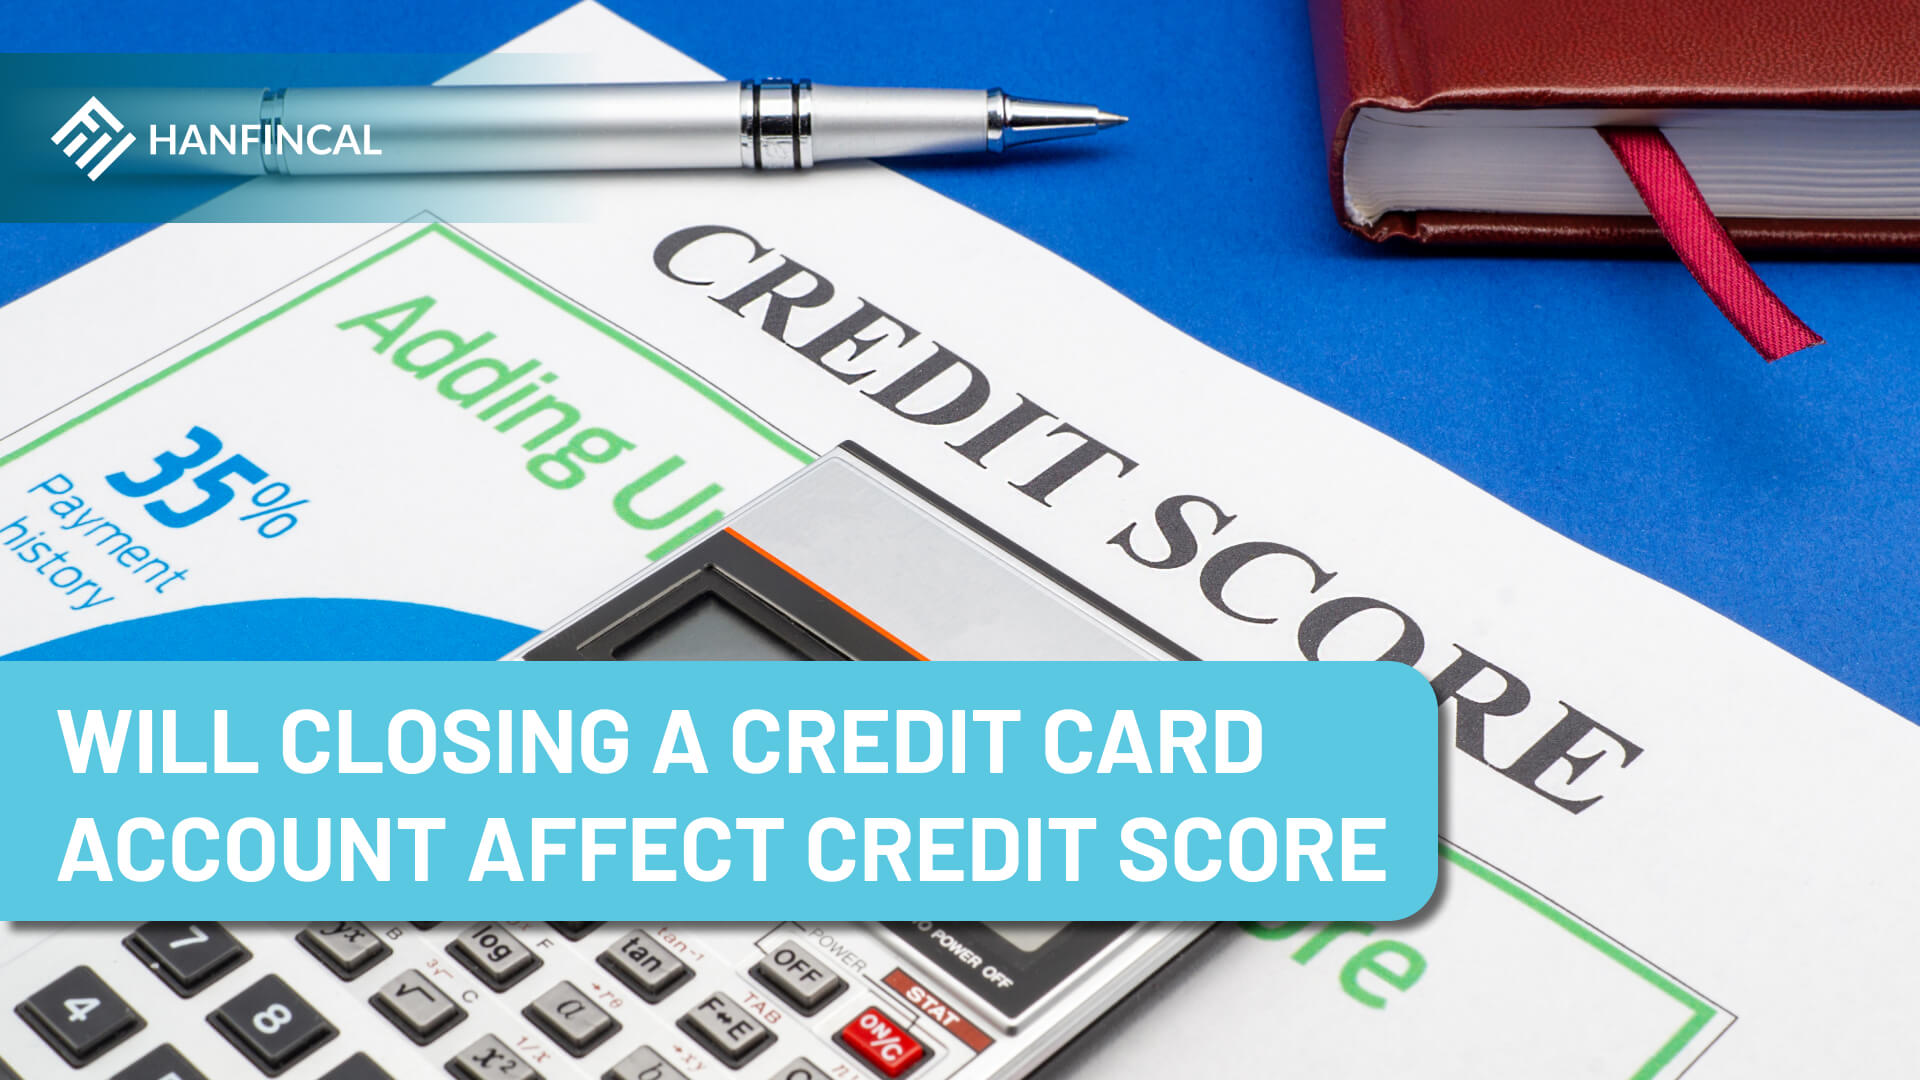 May Closing A Credit Card Account Affect Credit Score?